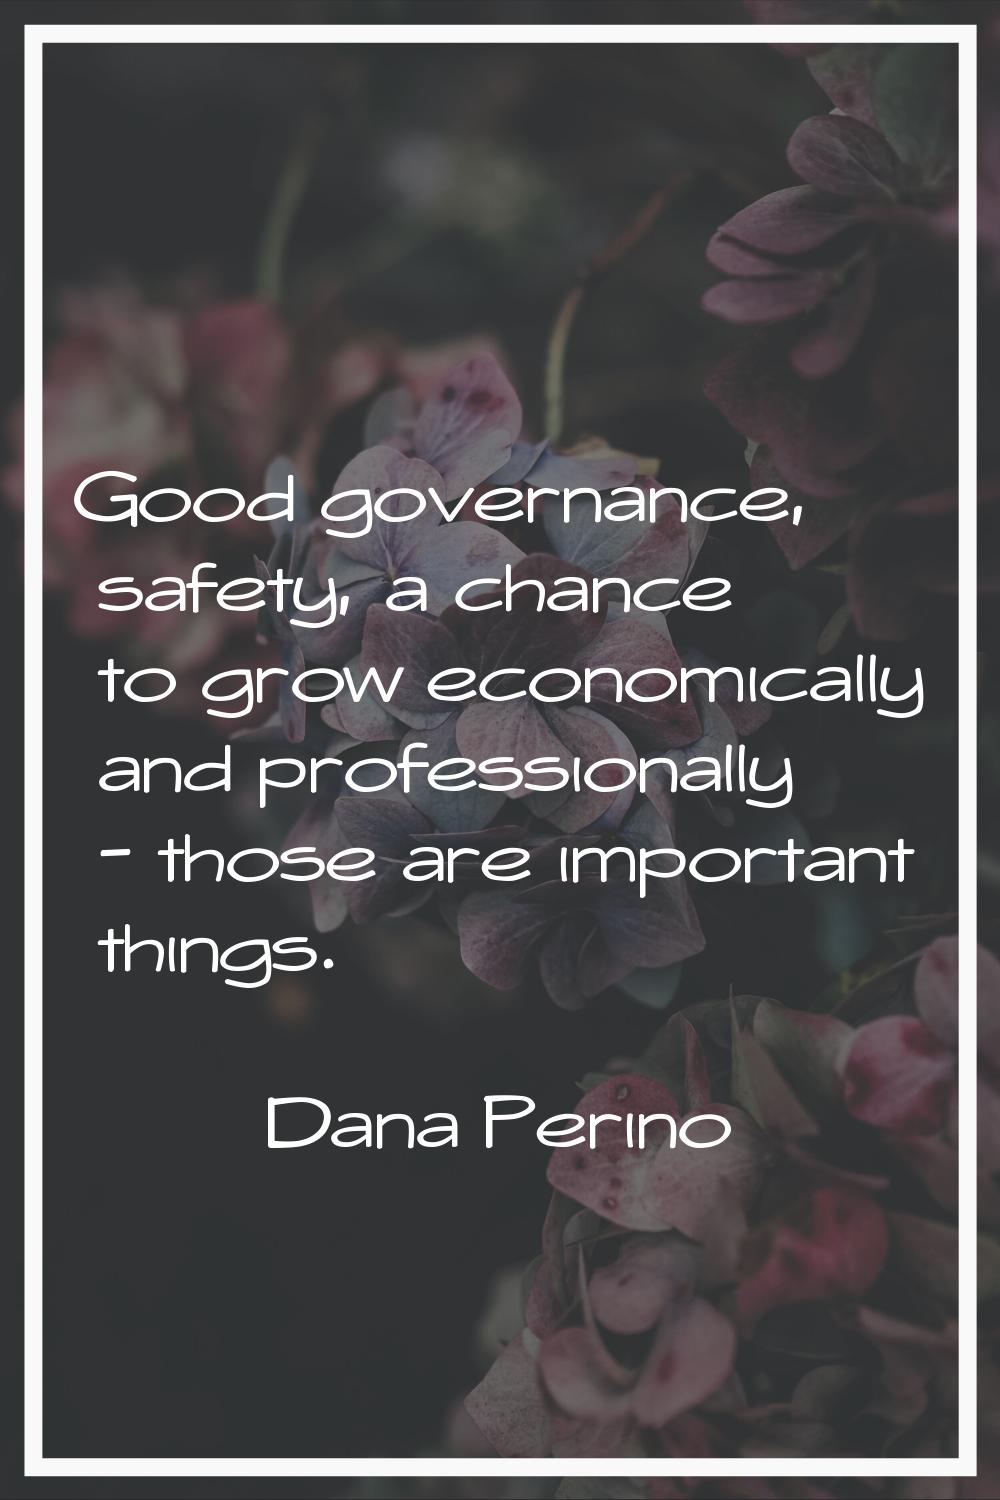 Good governance, safety, a chance to grow economically and professionally - those are important thi